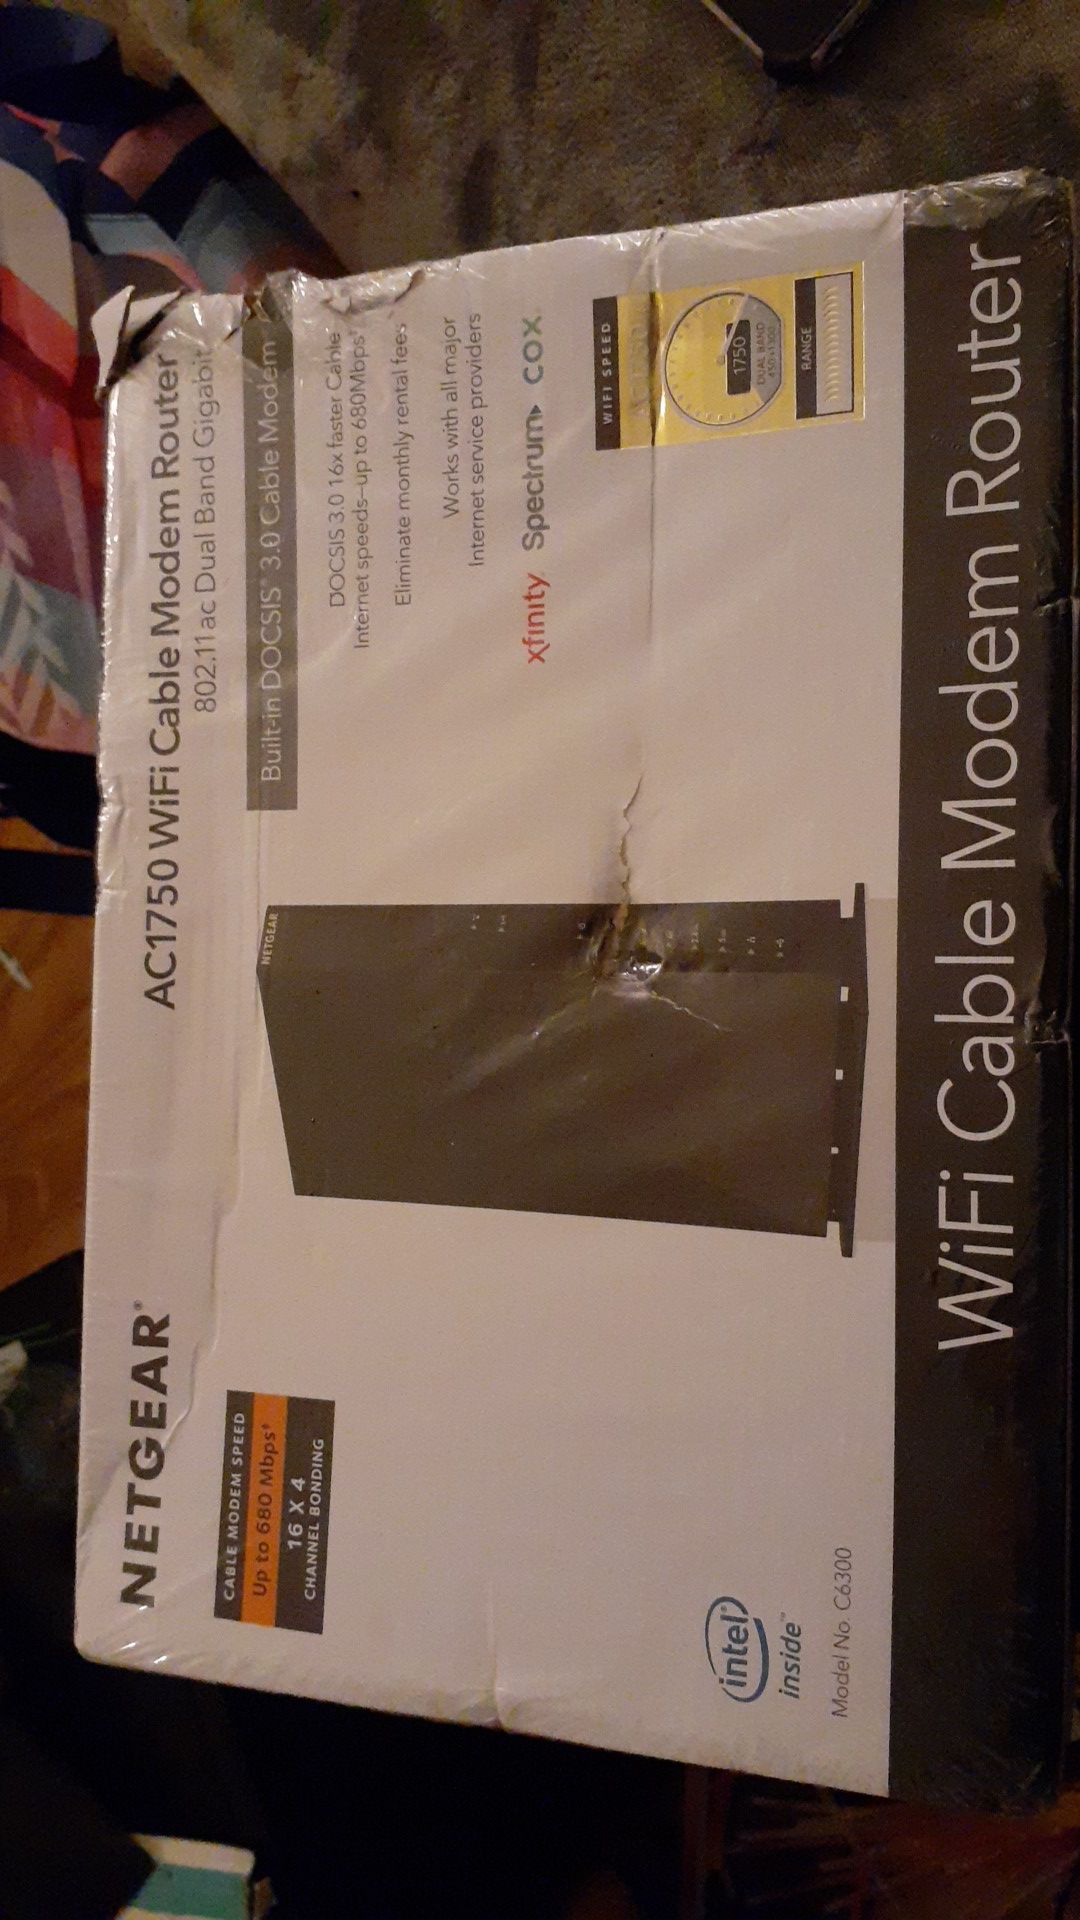 Netgear ac1750 wifi cable modem router. Brand new. Never opened. Asking 100$